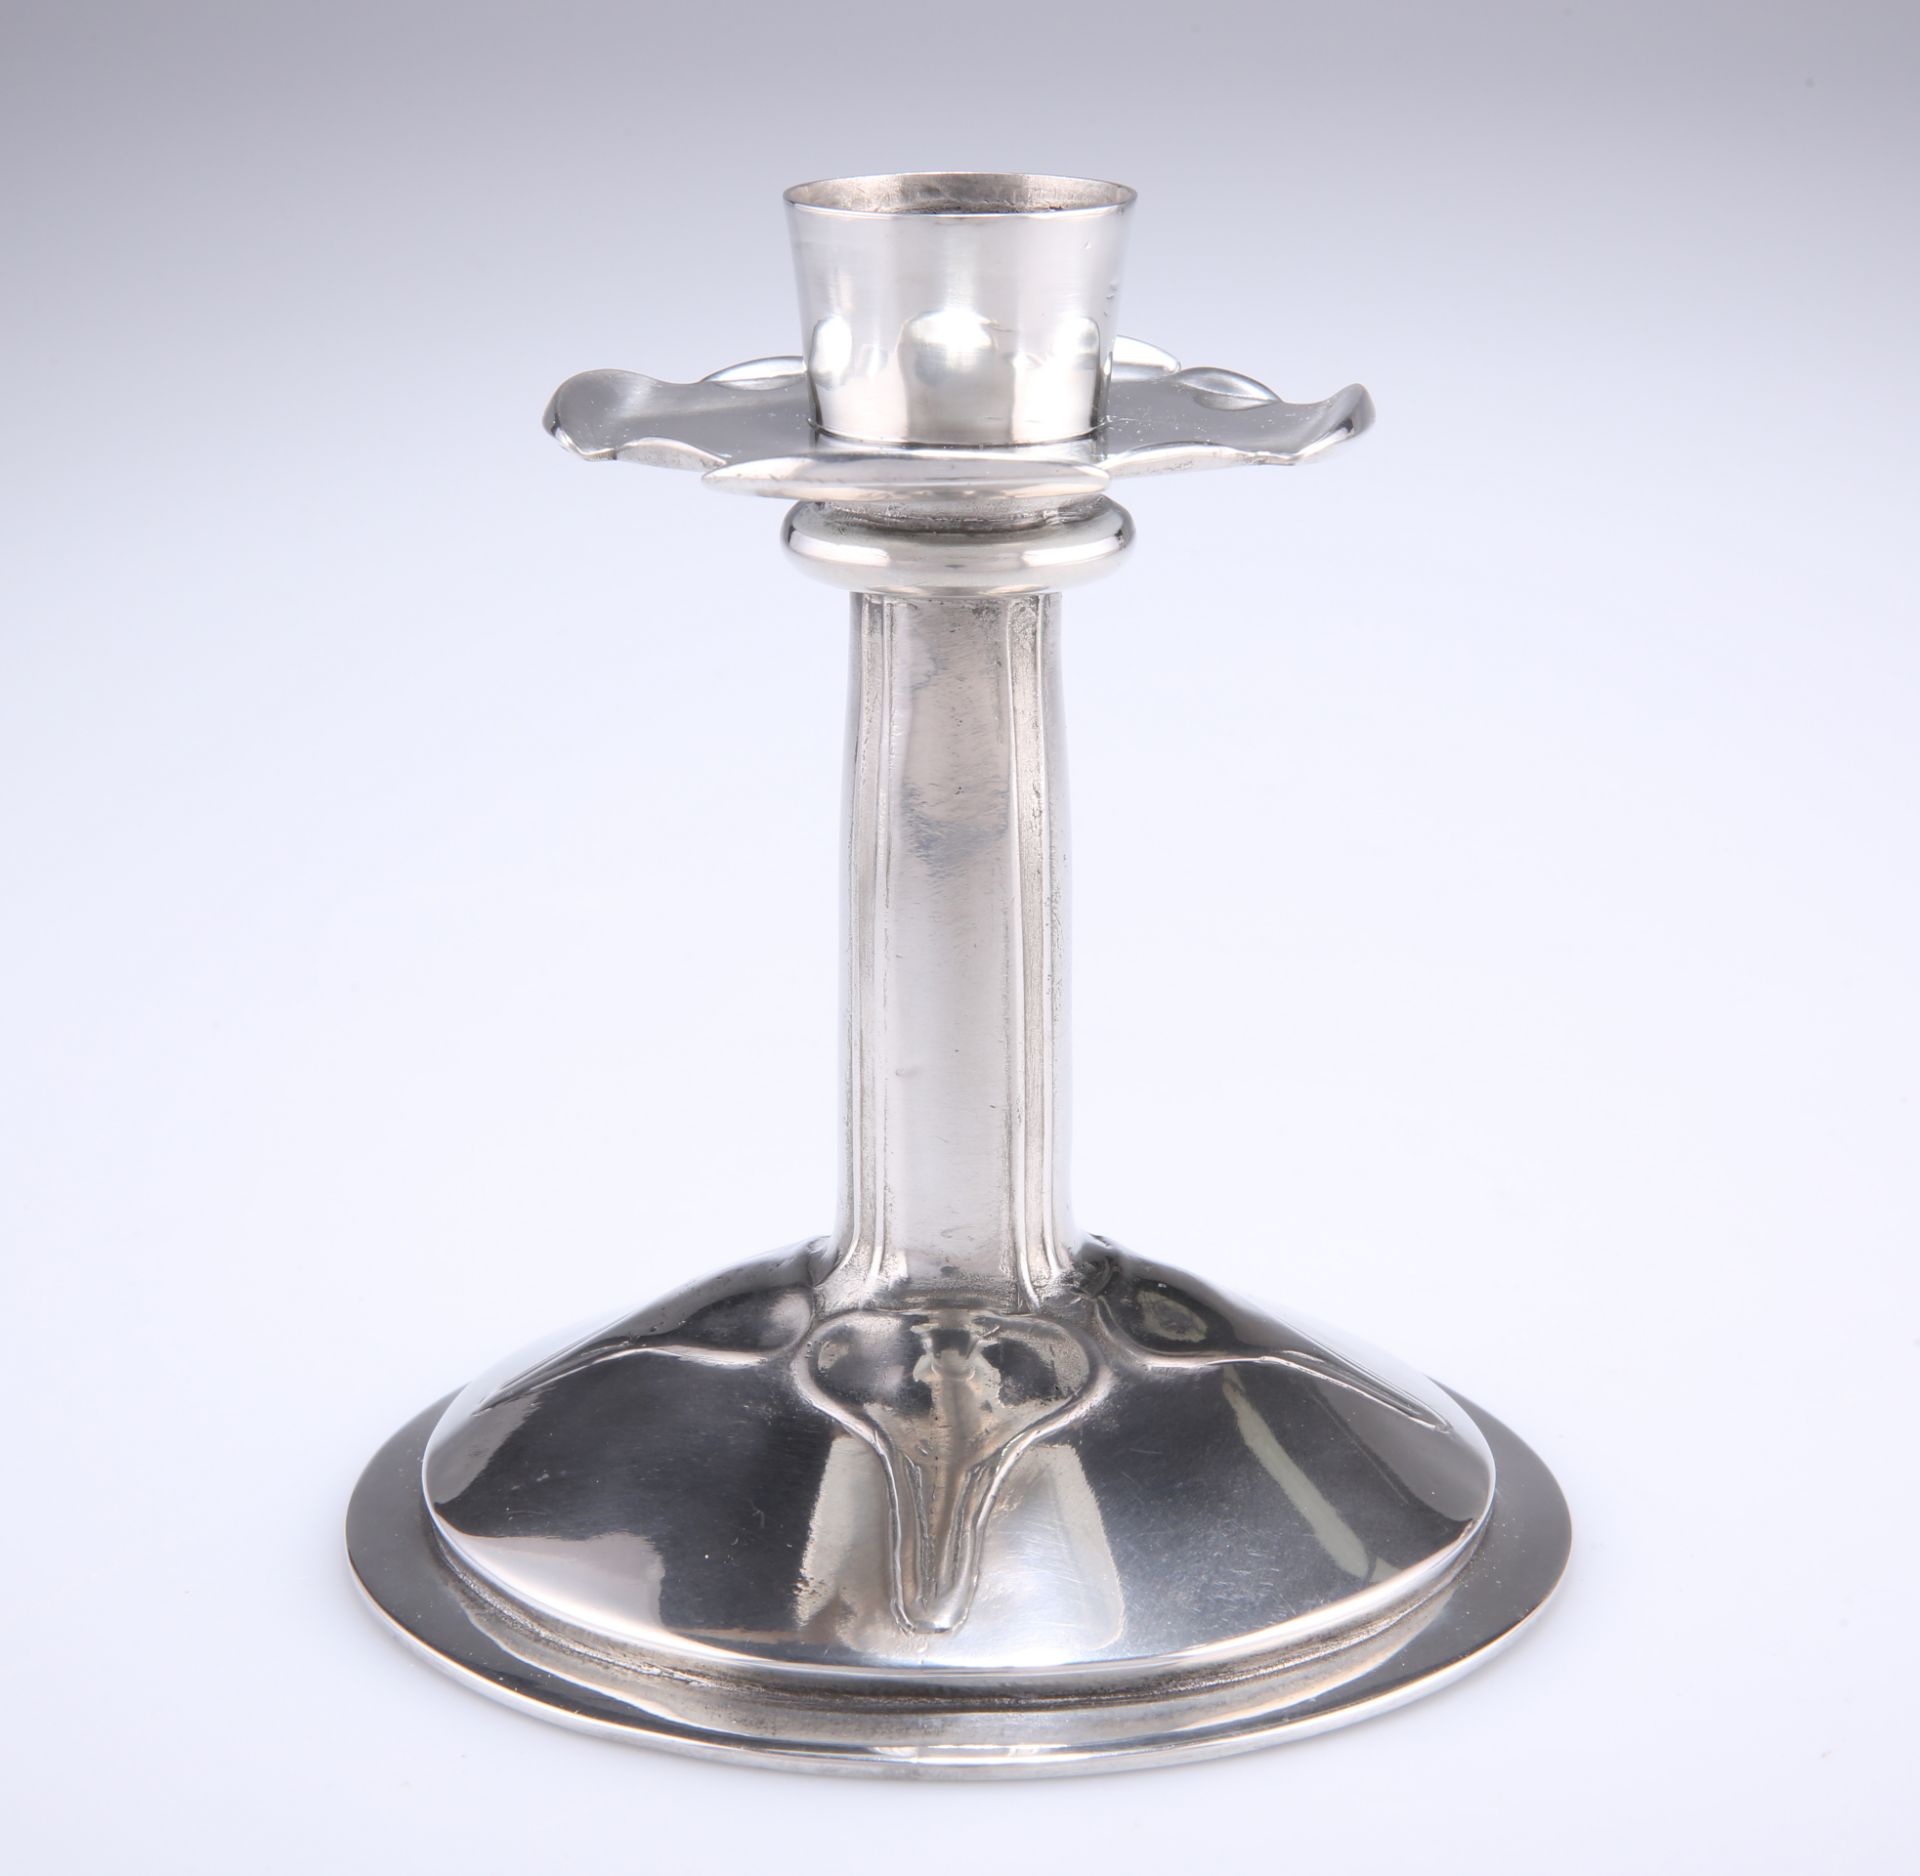 ARCHIBALD KNOX (1864-1933) A LIBERTY & CO TUDRIC PEWTER CANDLESTICK, NO.023, of squat form with